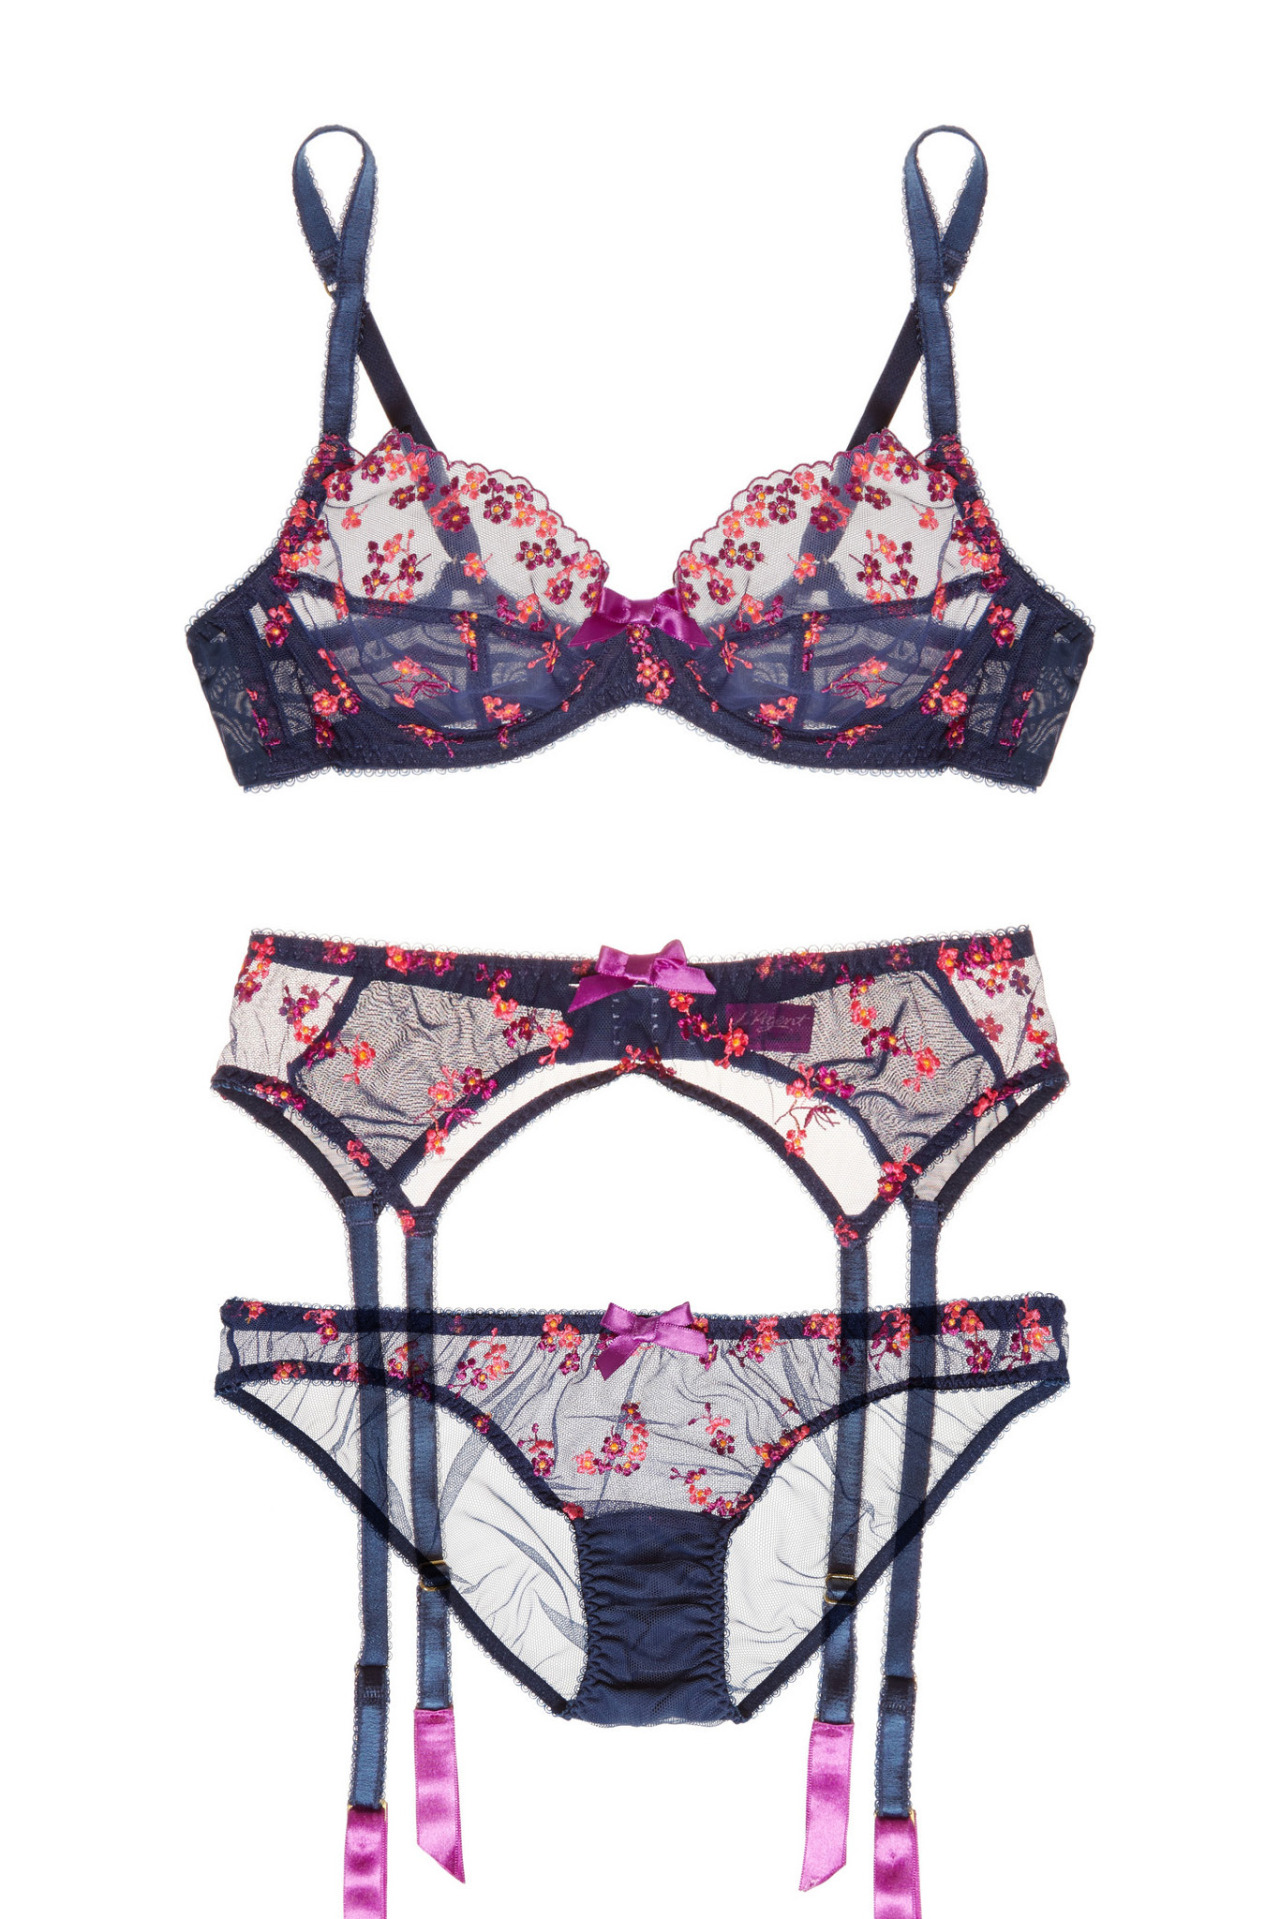 Lingerie I Want — for-the-love-of-lingerie: Agent Provocateur and...